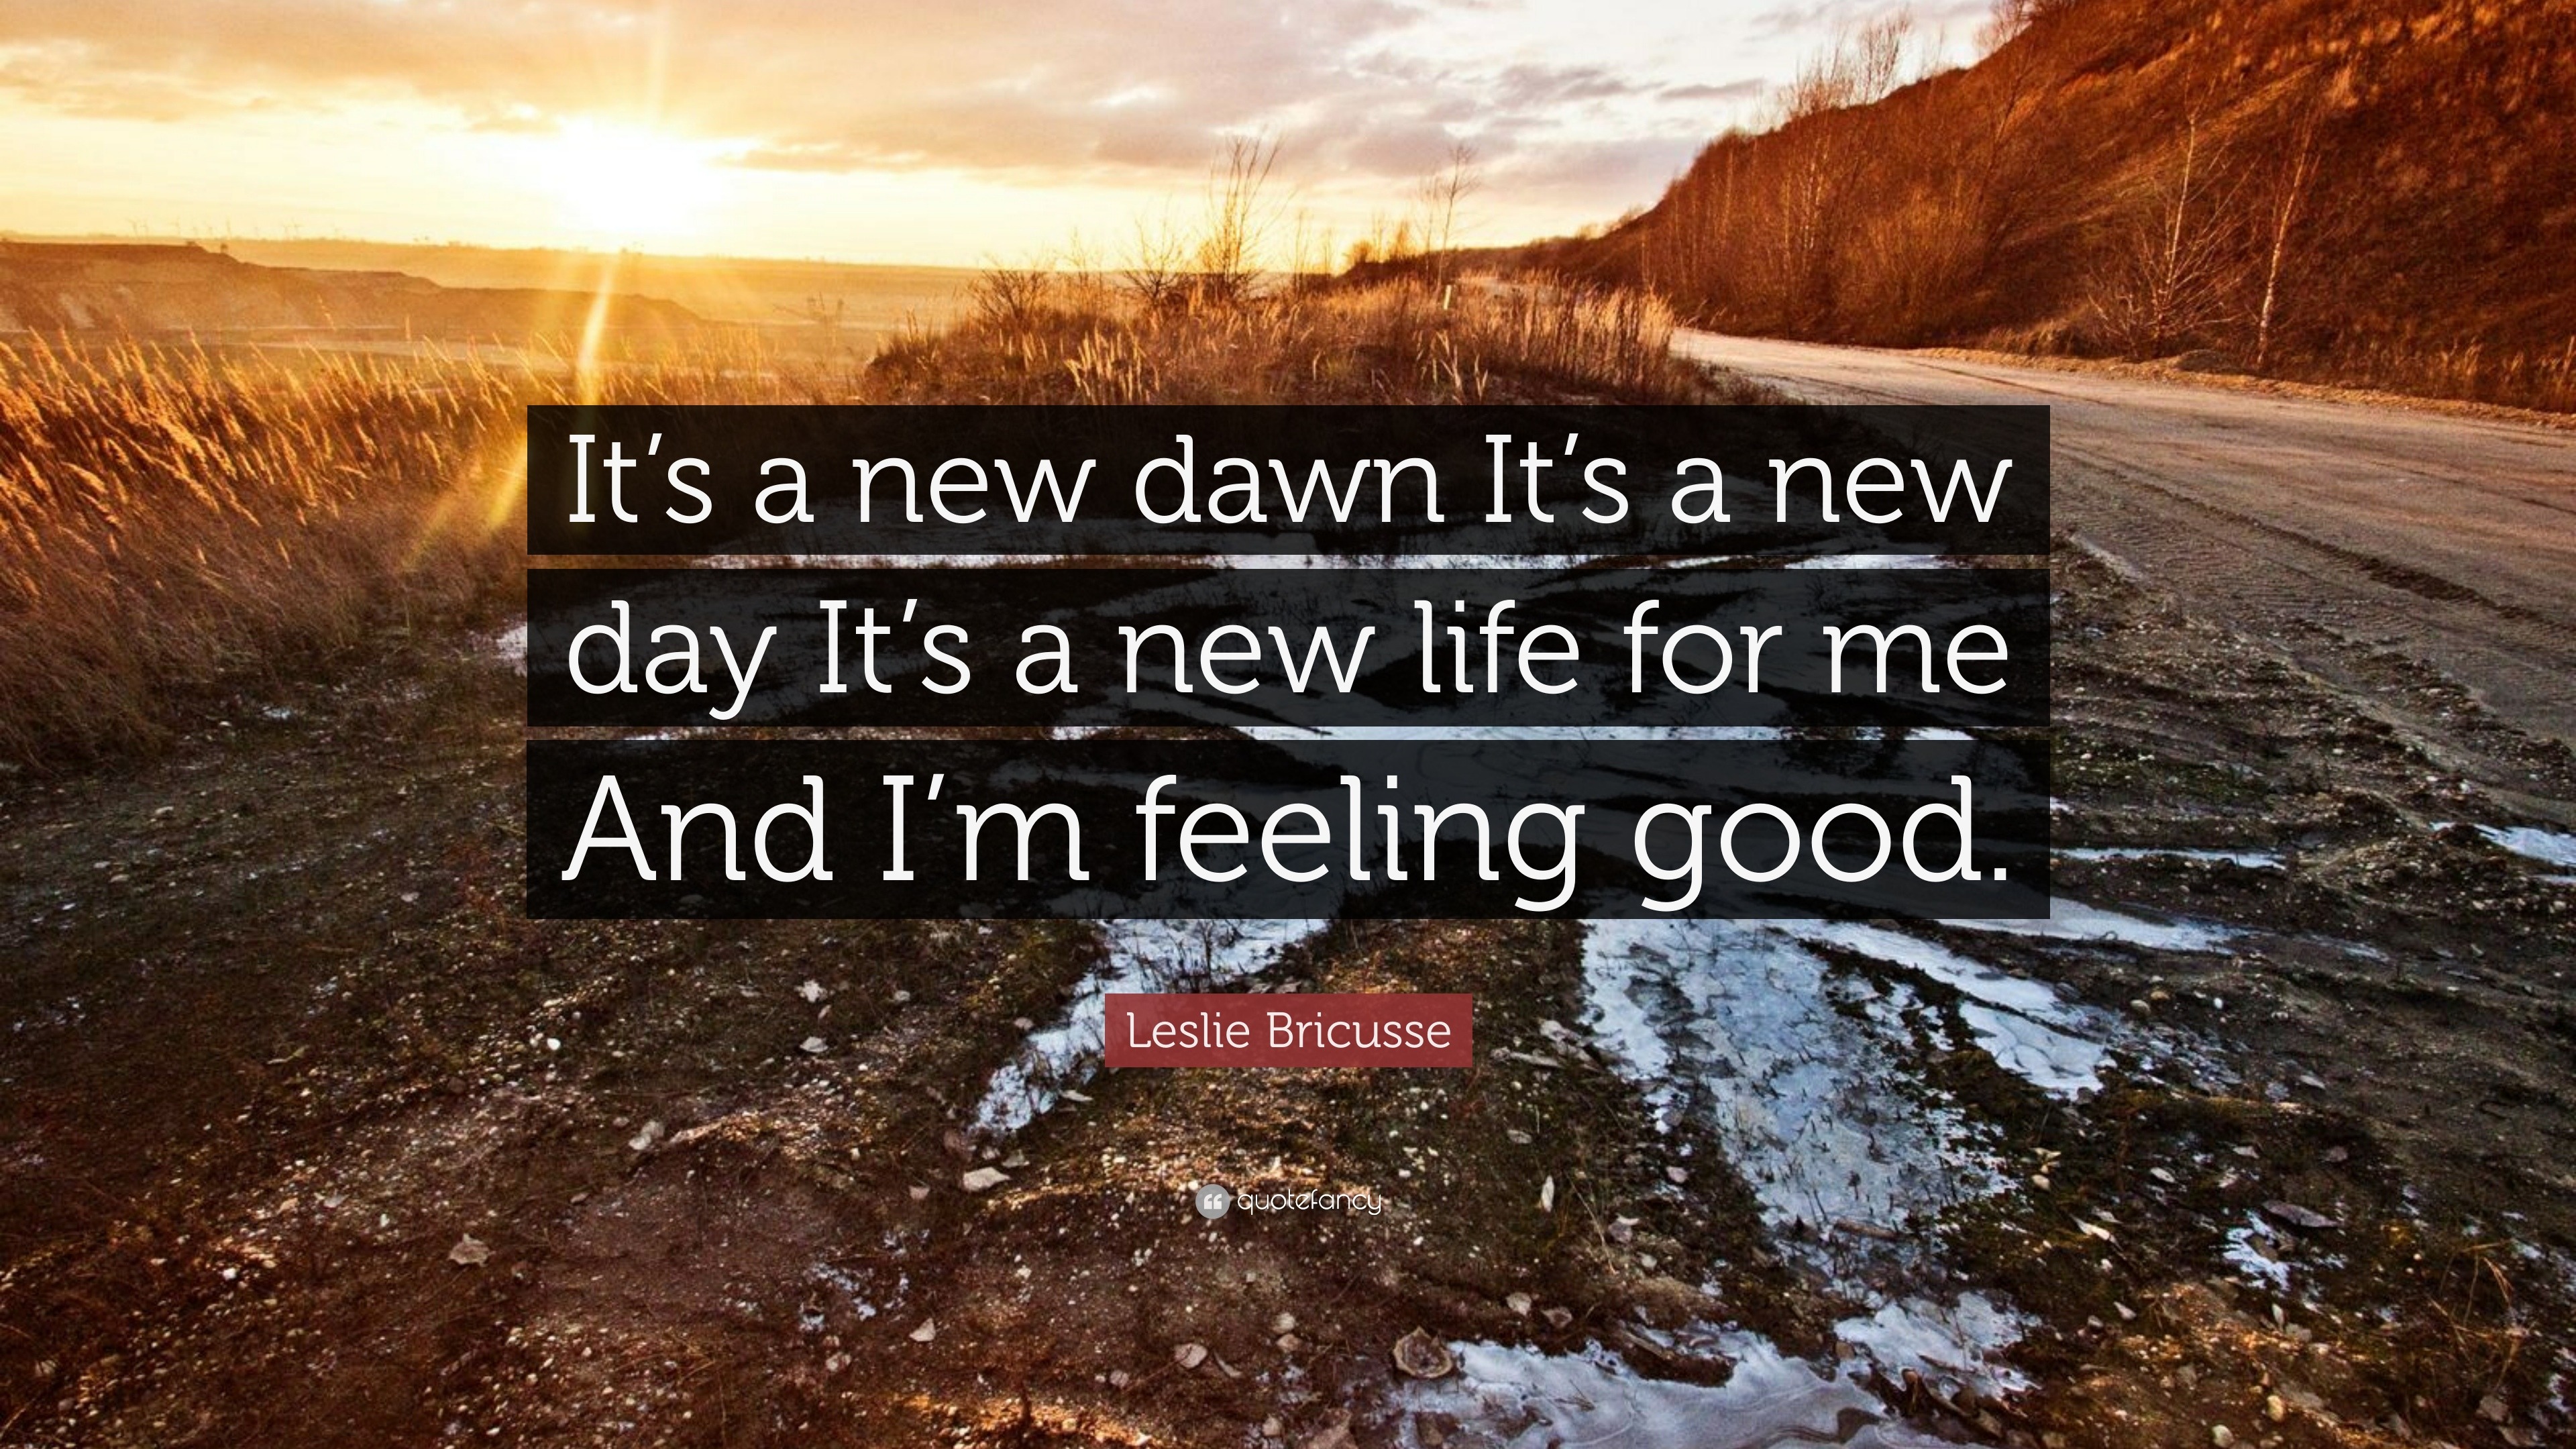 Leslie Bricusse Quote It S A New Dawn It S A New Day It S A New Life For